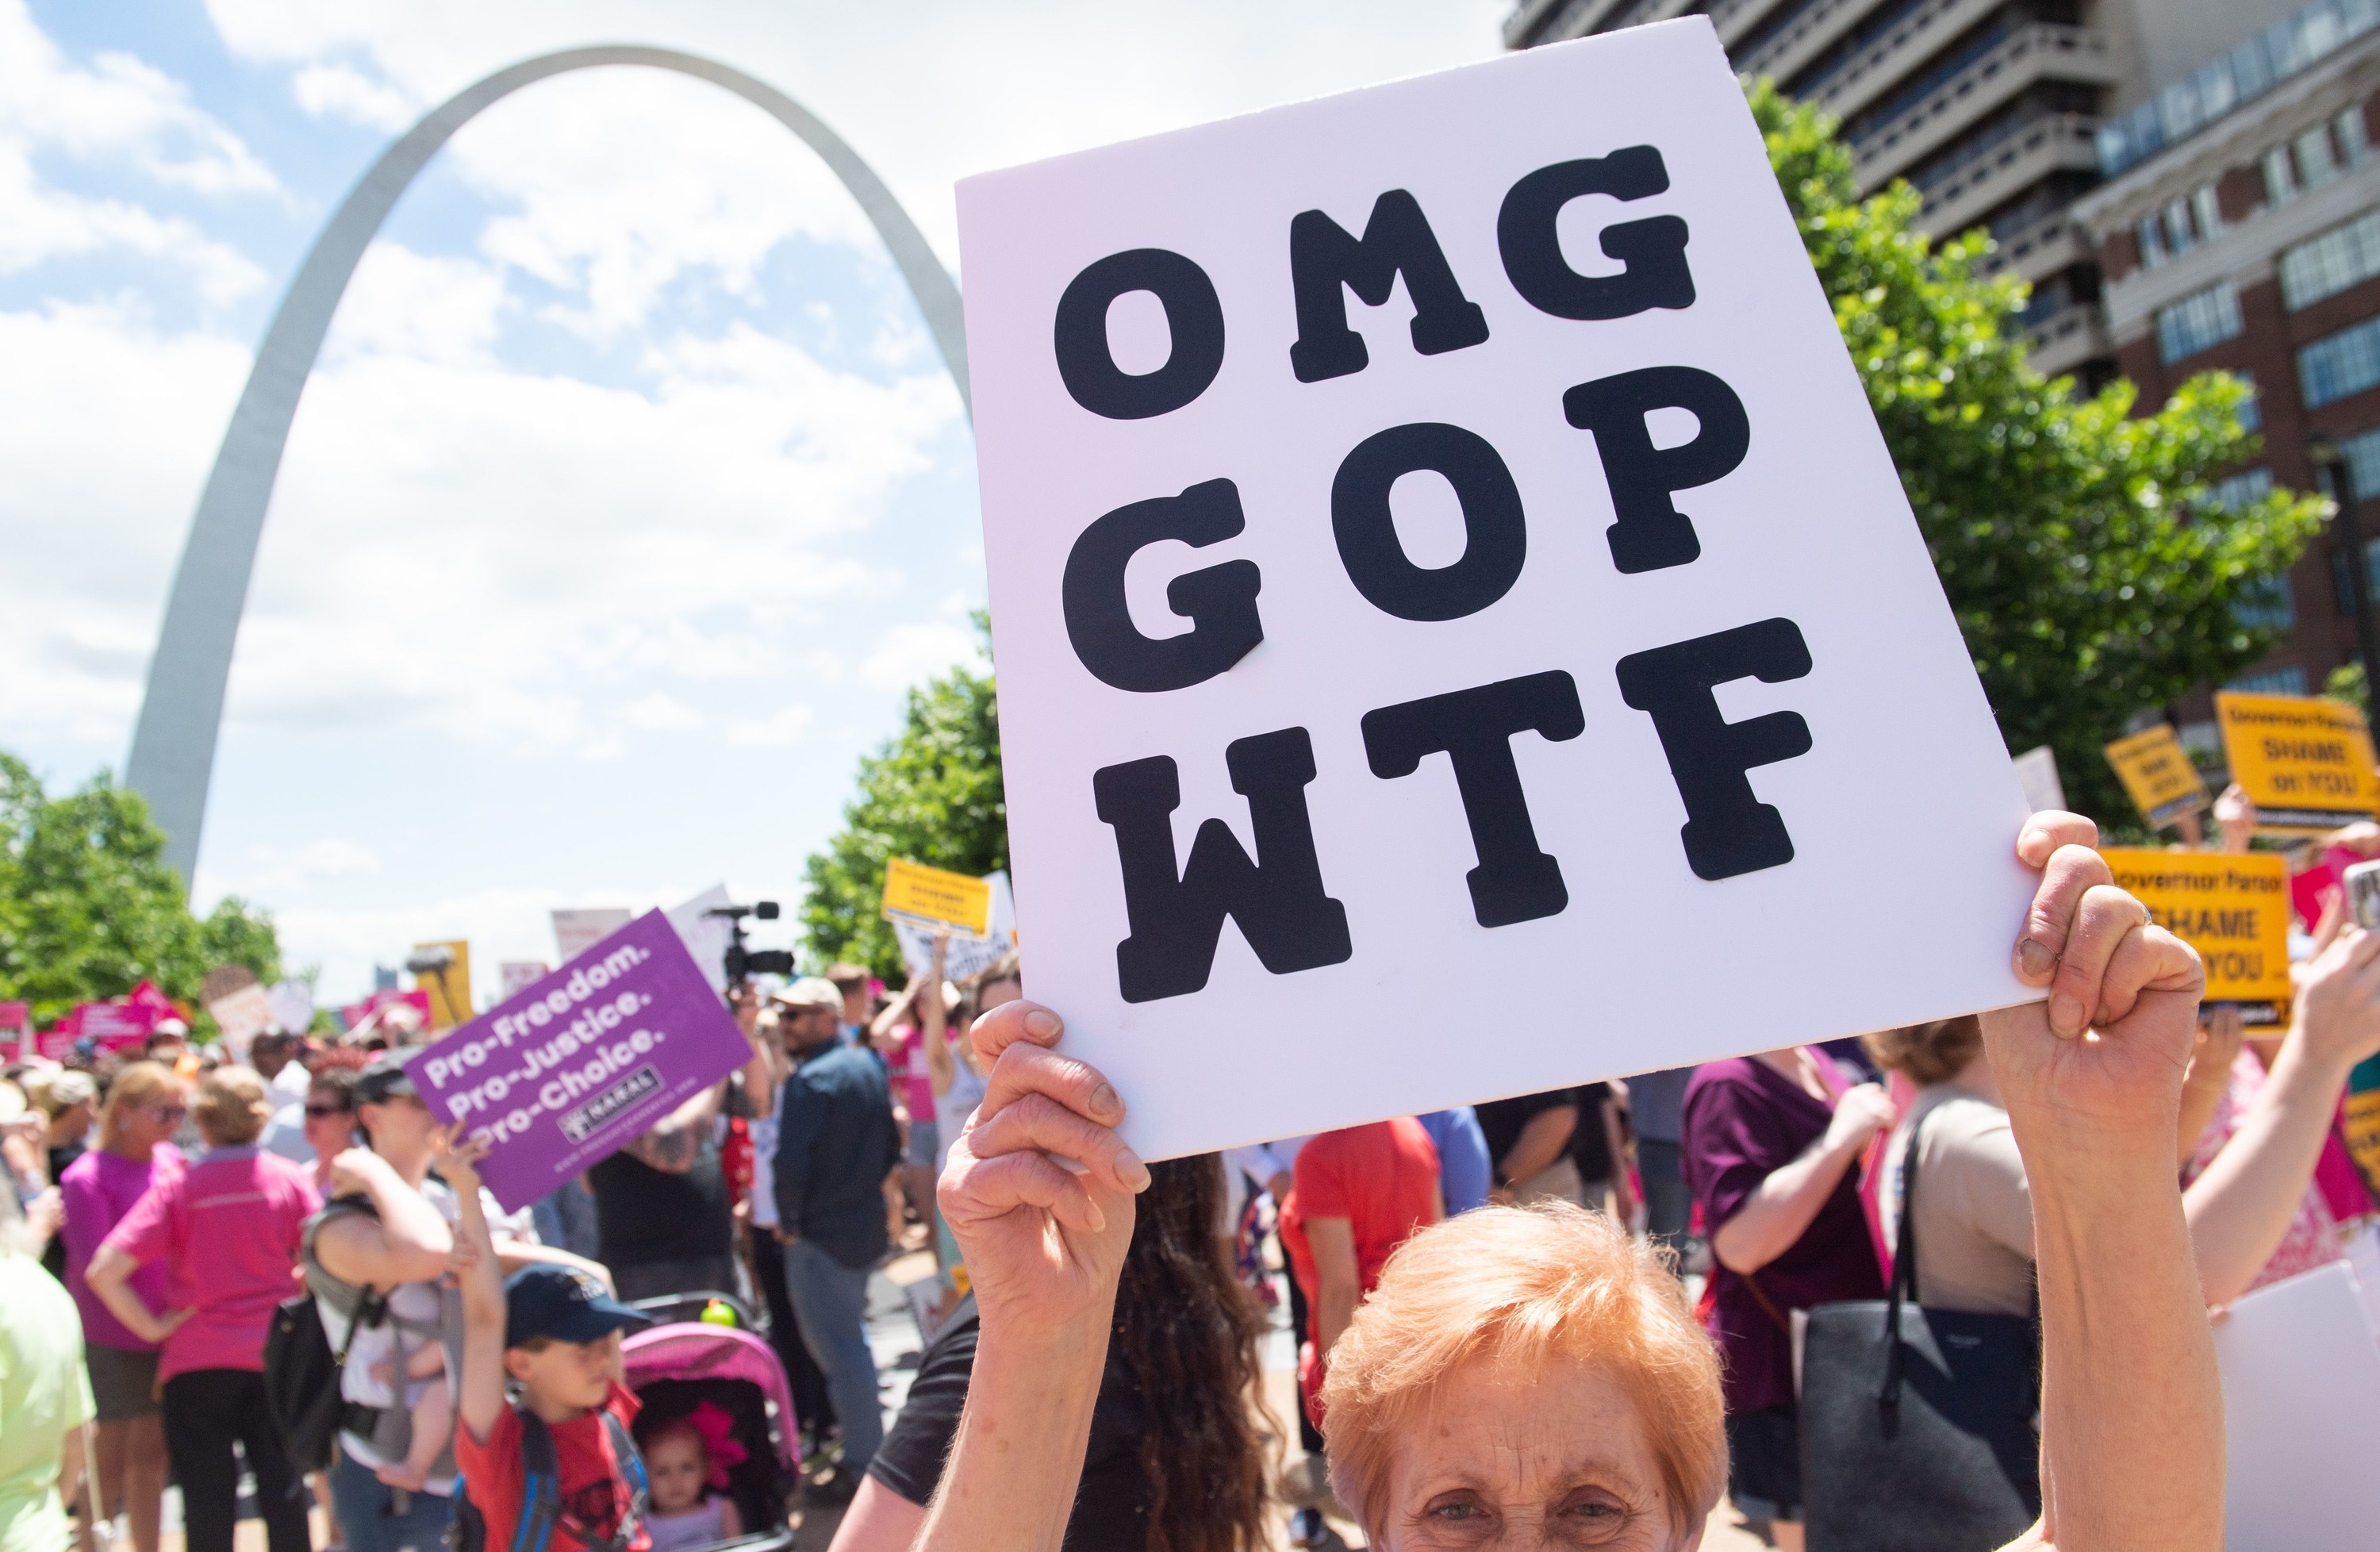 A protester standing near the Gateway Arch in St. Louis holds a sign reading &quot;OMG GOP WTF&quot;